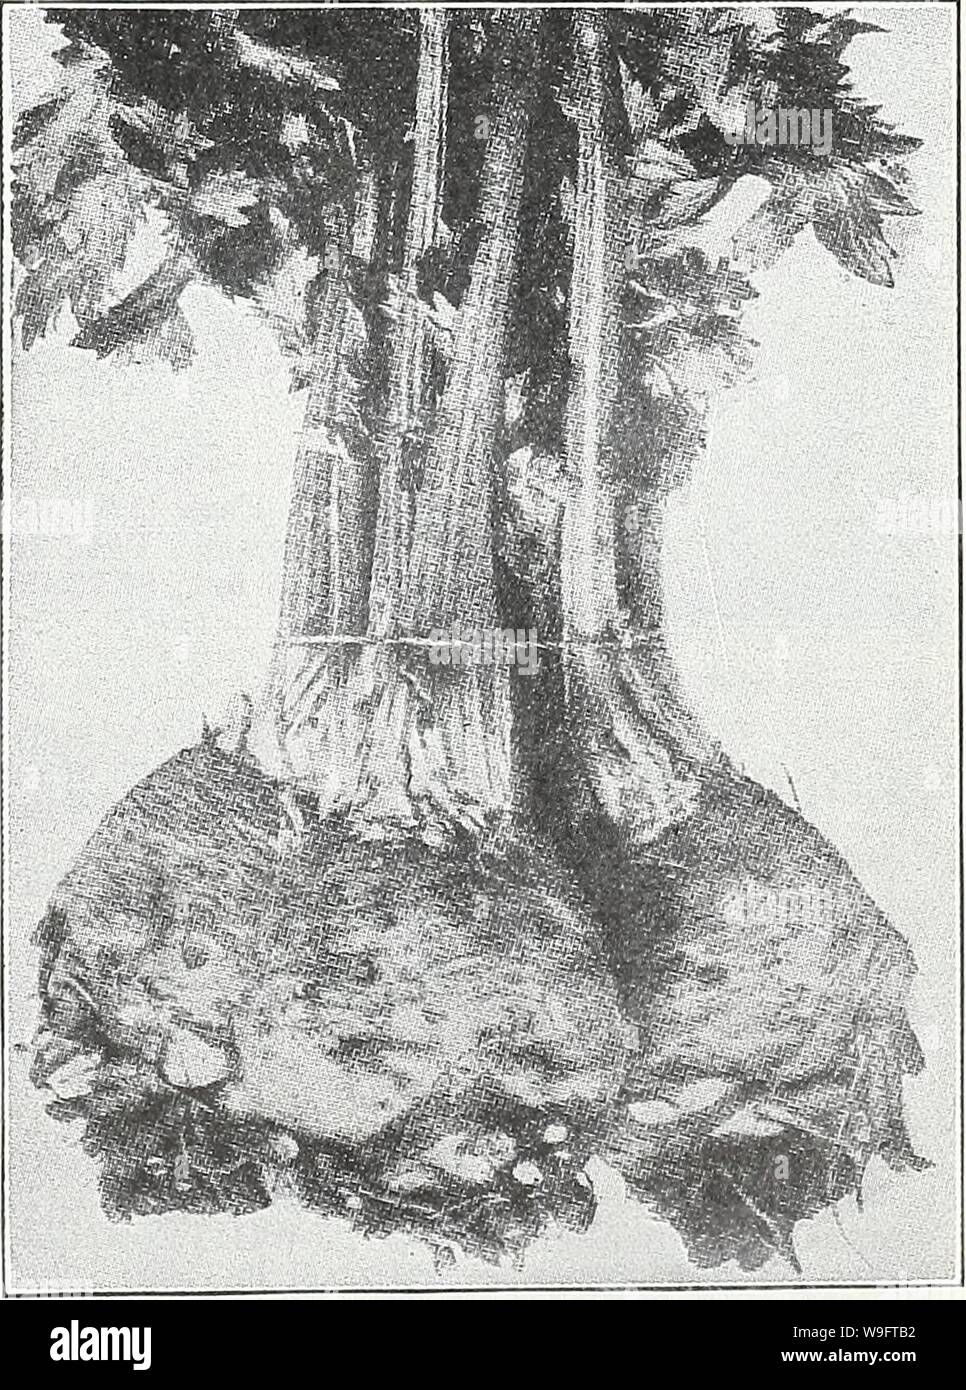 Archive image from page 68 of Currie's garden annual  spring. Currie's garden annual : spring 1934 59th year  curriesgardenann19curr 0 Year: 1934 ( XL Celery (Golden Phenomenal) WHITE PLUME EXTRA SELECTED —A favorite early self- blanching variety. It requires very little earthing up. Stalks crisp and sweet. Pkt., 10c; 1 oz., 35c;  lb., $1.00; 1 lb., $3.00. WINTER QUEEN A compact variety with large, broad, creamy white stalks, crisp and tender. Pkt., 10c; 1 oz., 30c; y4 lb., 90c; 1 lb., $2.50. SOUP, OR FLAVORING CELERY Not for planting purposes, but seed is used for flavoring. 1 oz., 10c; V4 lb Stock Photo